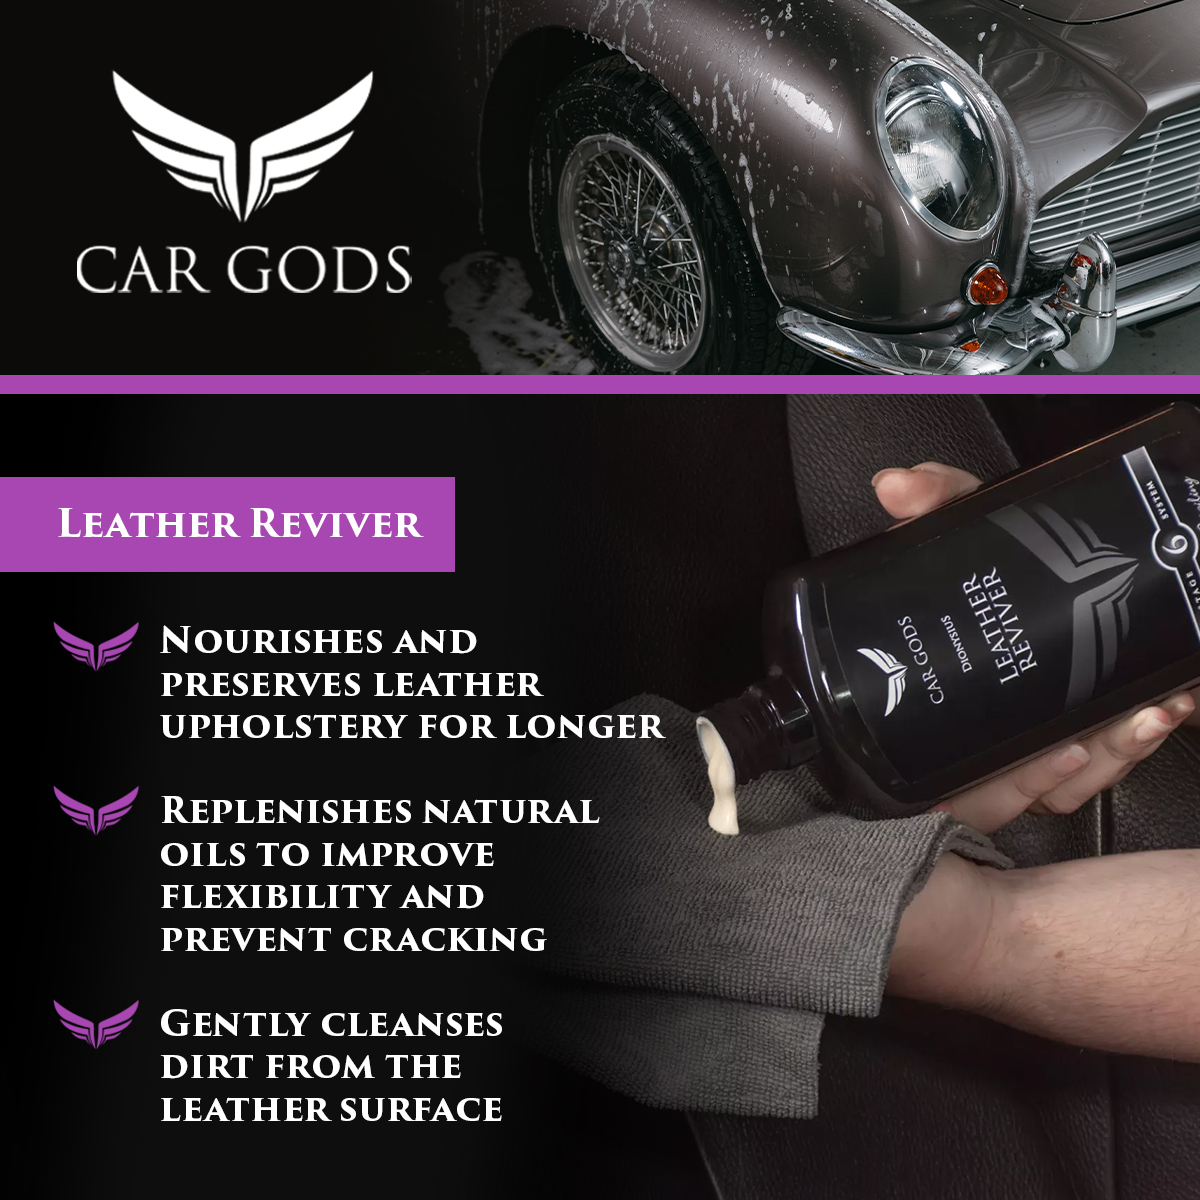 Car Gods Leather Reviver. Nourishes and preserves leather upholstery, replenishing the natural oils to improve flexibility and prevent cracking. Gently clean and cleanse leather surfaces with this silicone and solvent free formula.